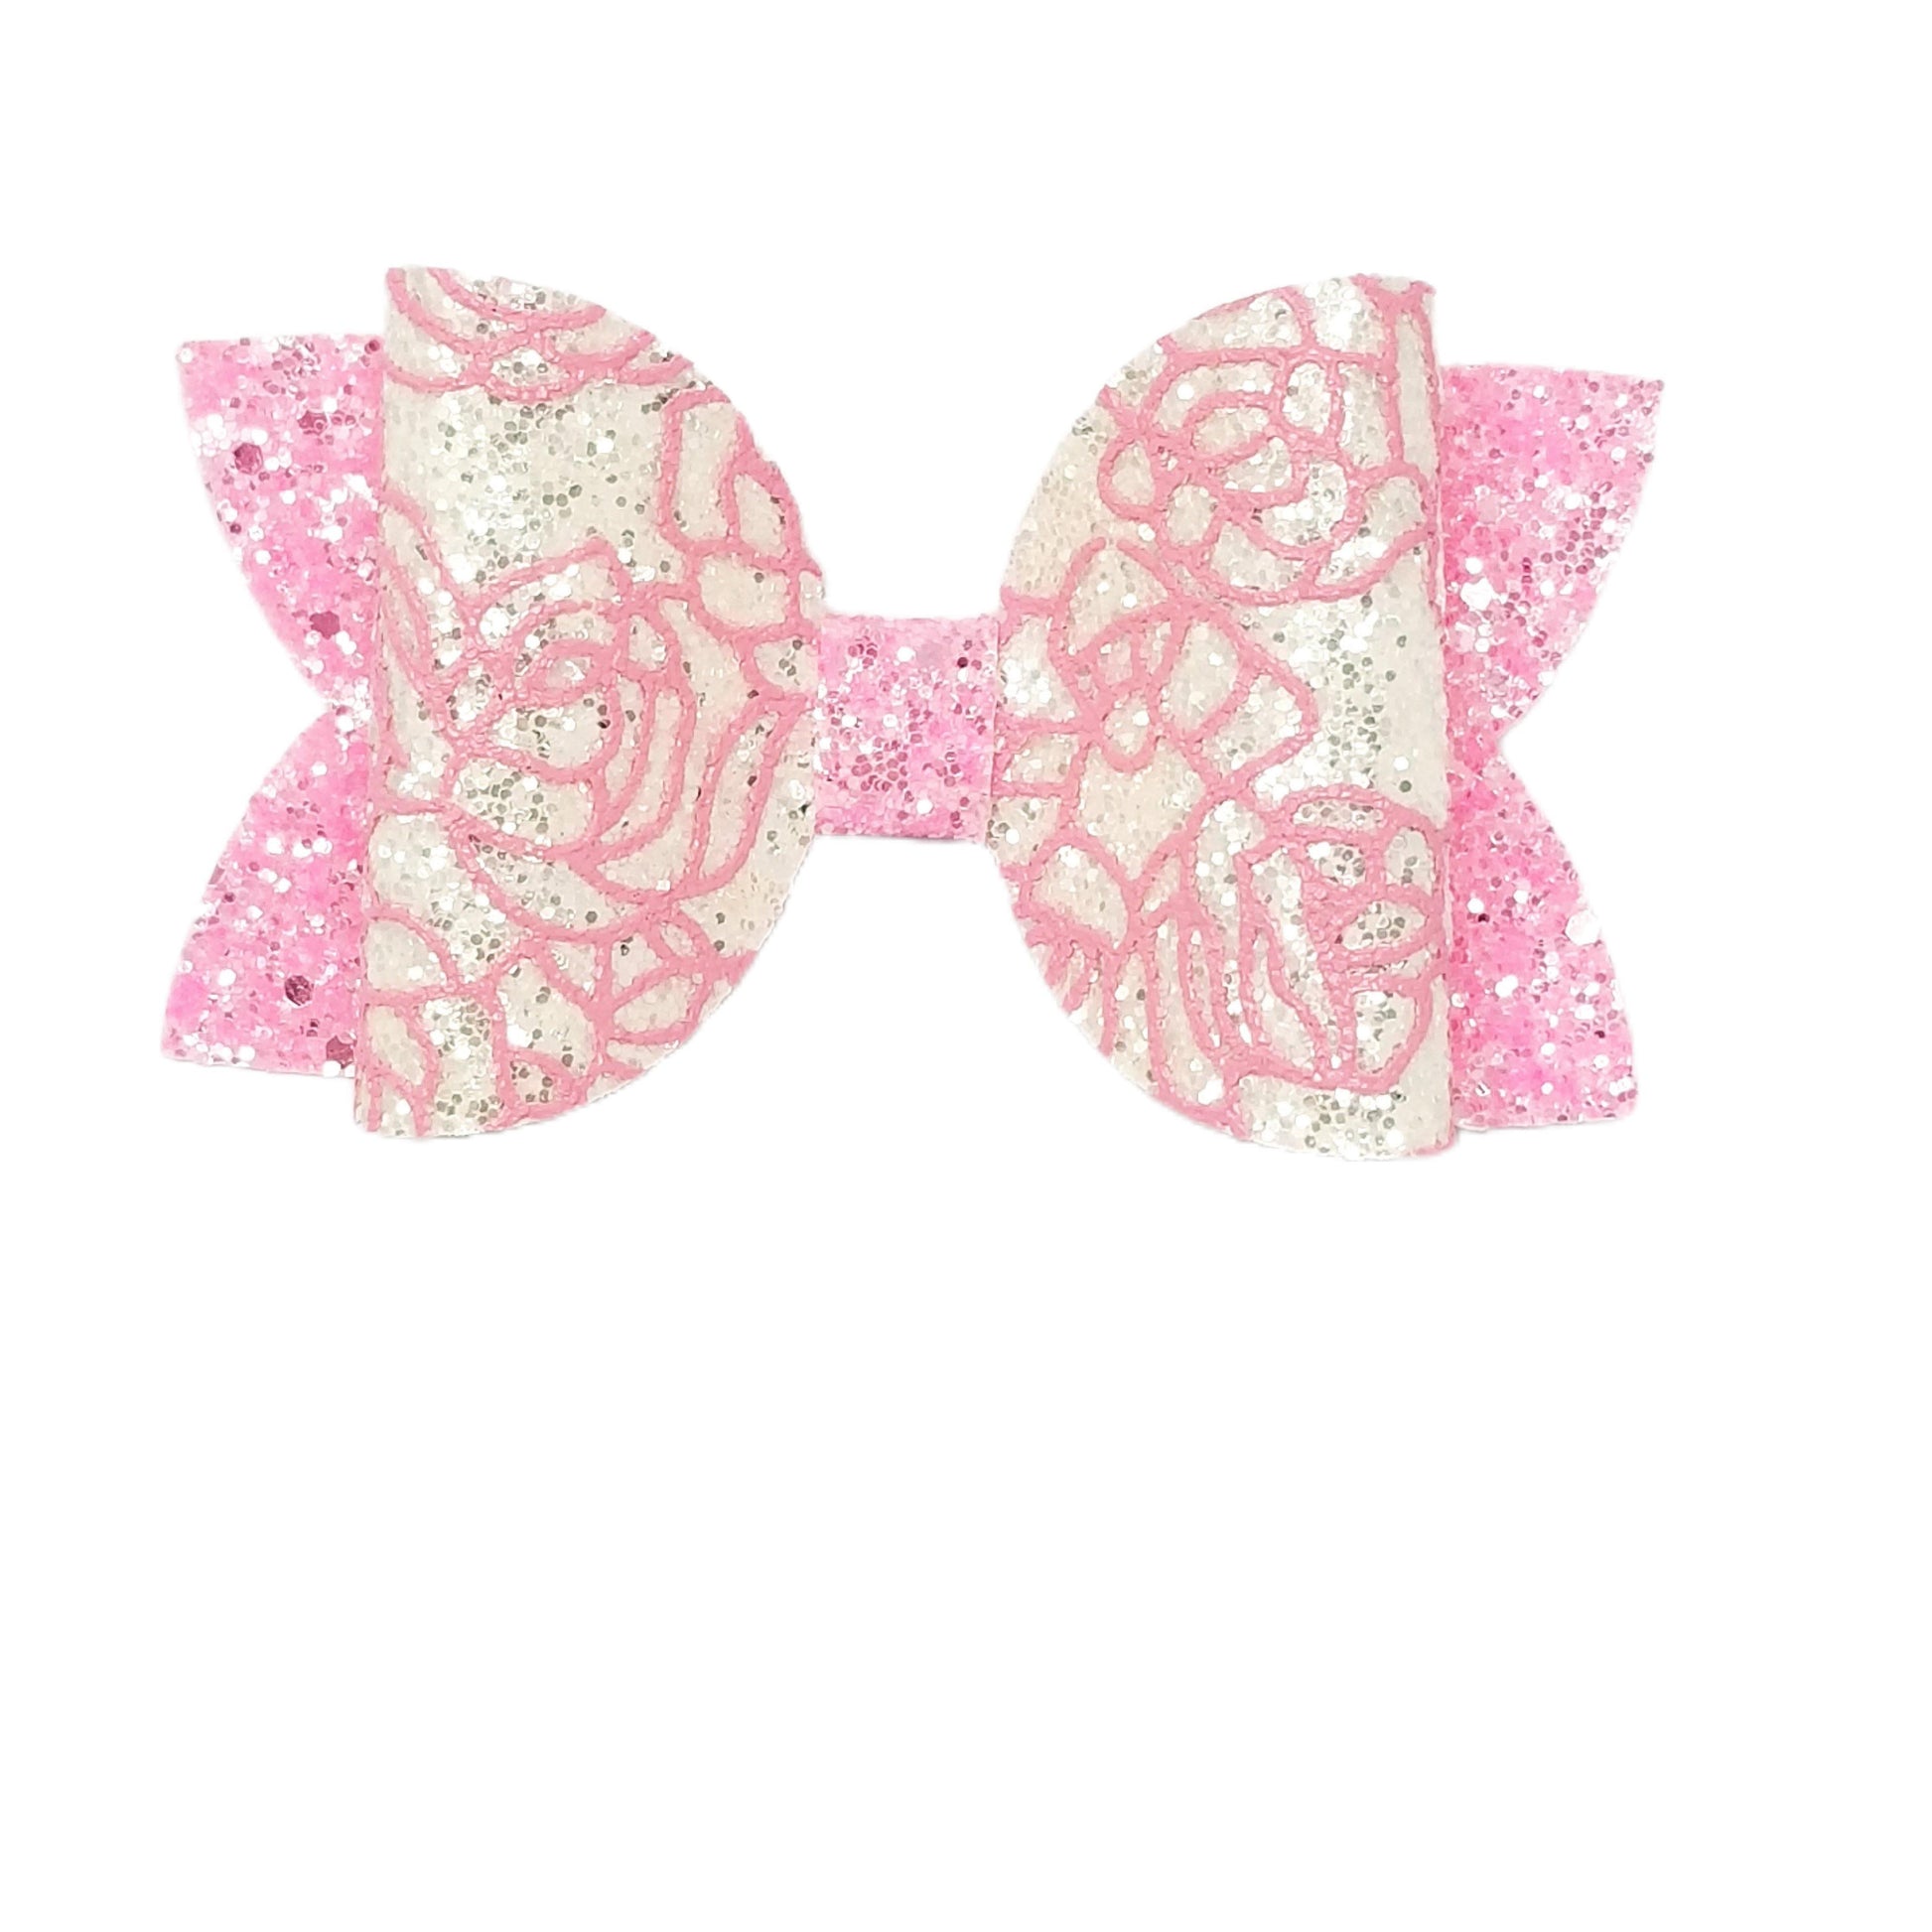 5 inch Pink Lace Rose Diva Bow